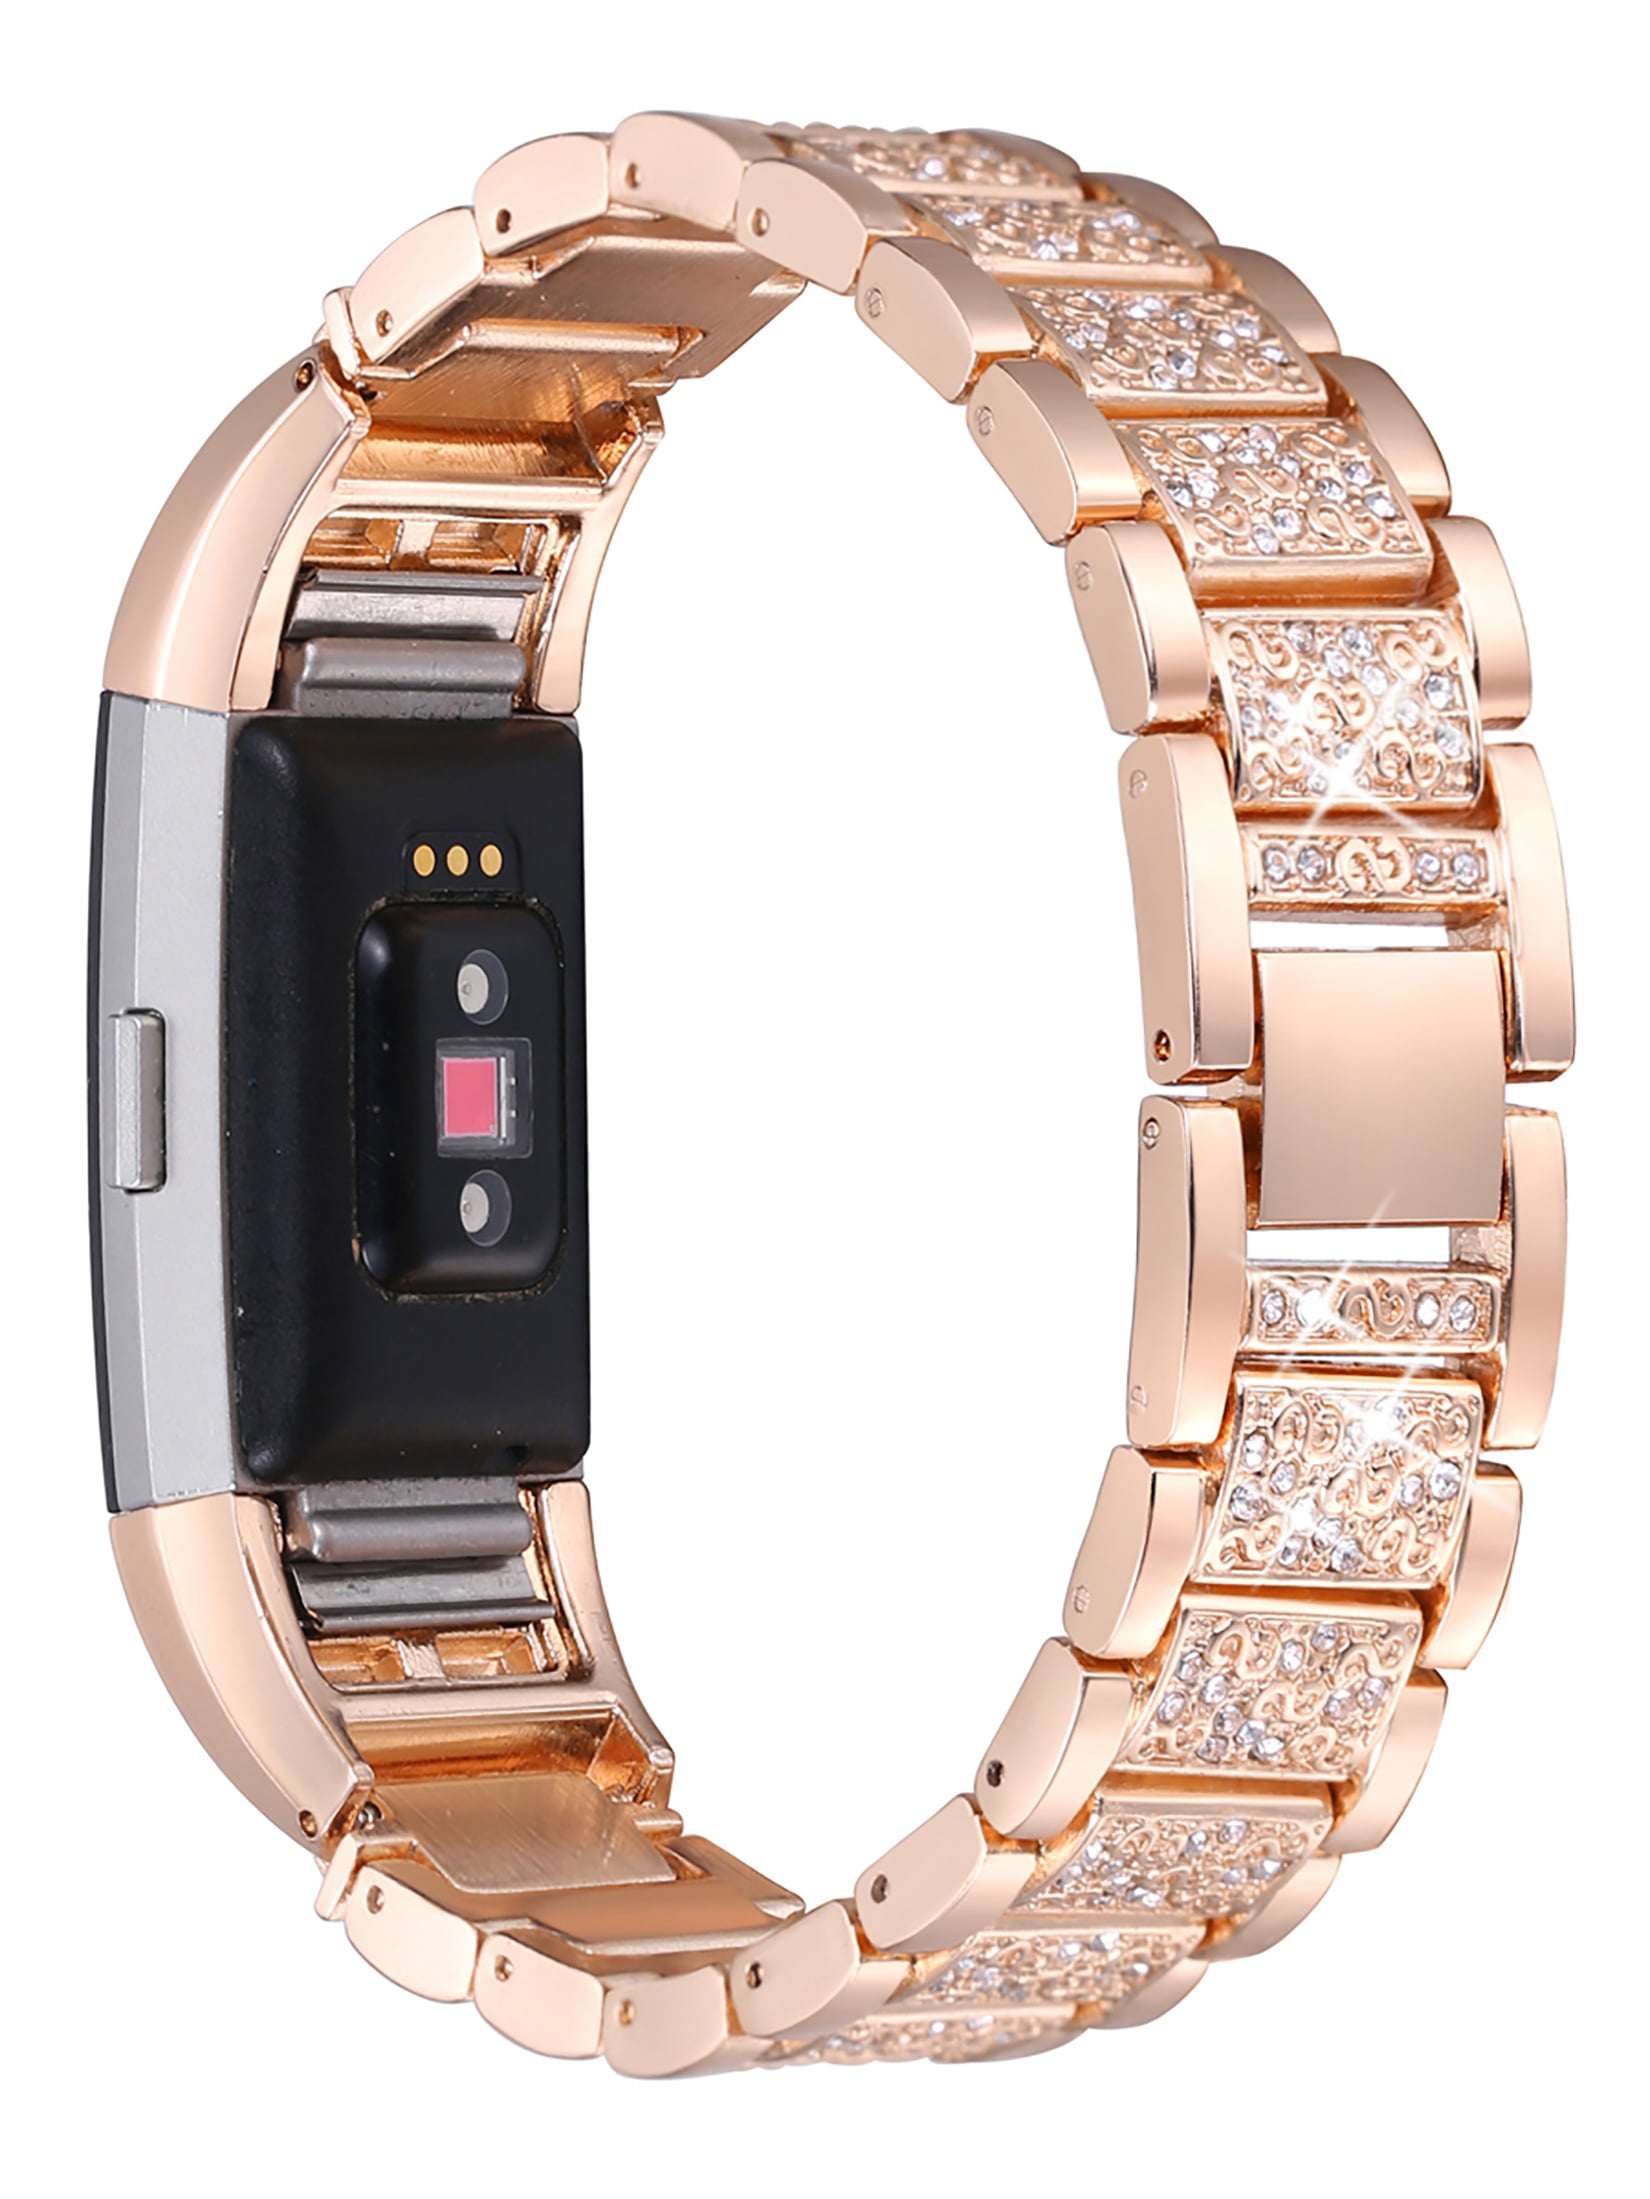 fitbit rose gold band